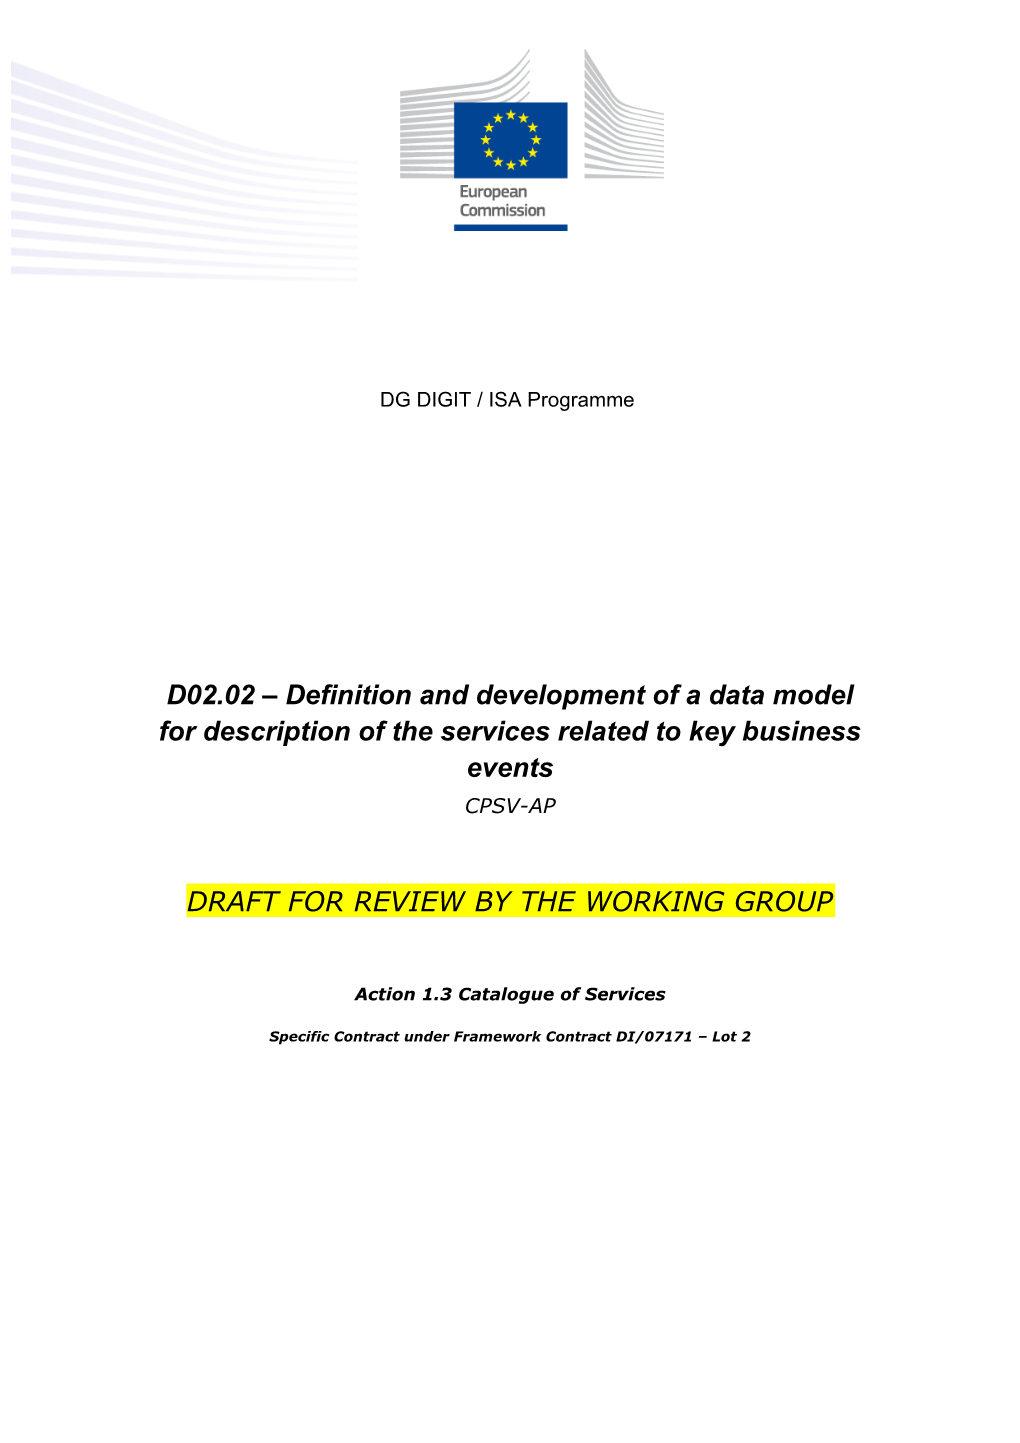 D02.02 Definition and Development of a Data Model for Description of the Services Related